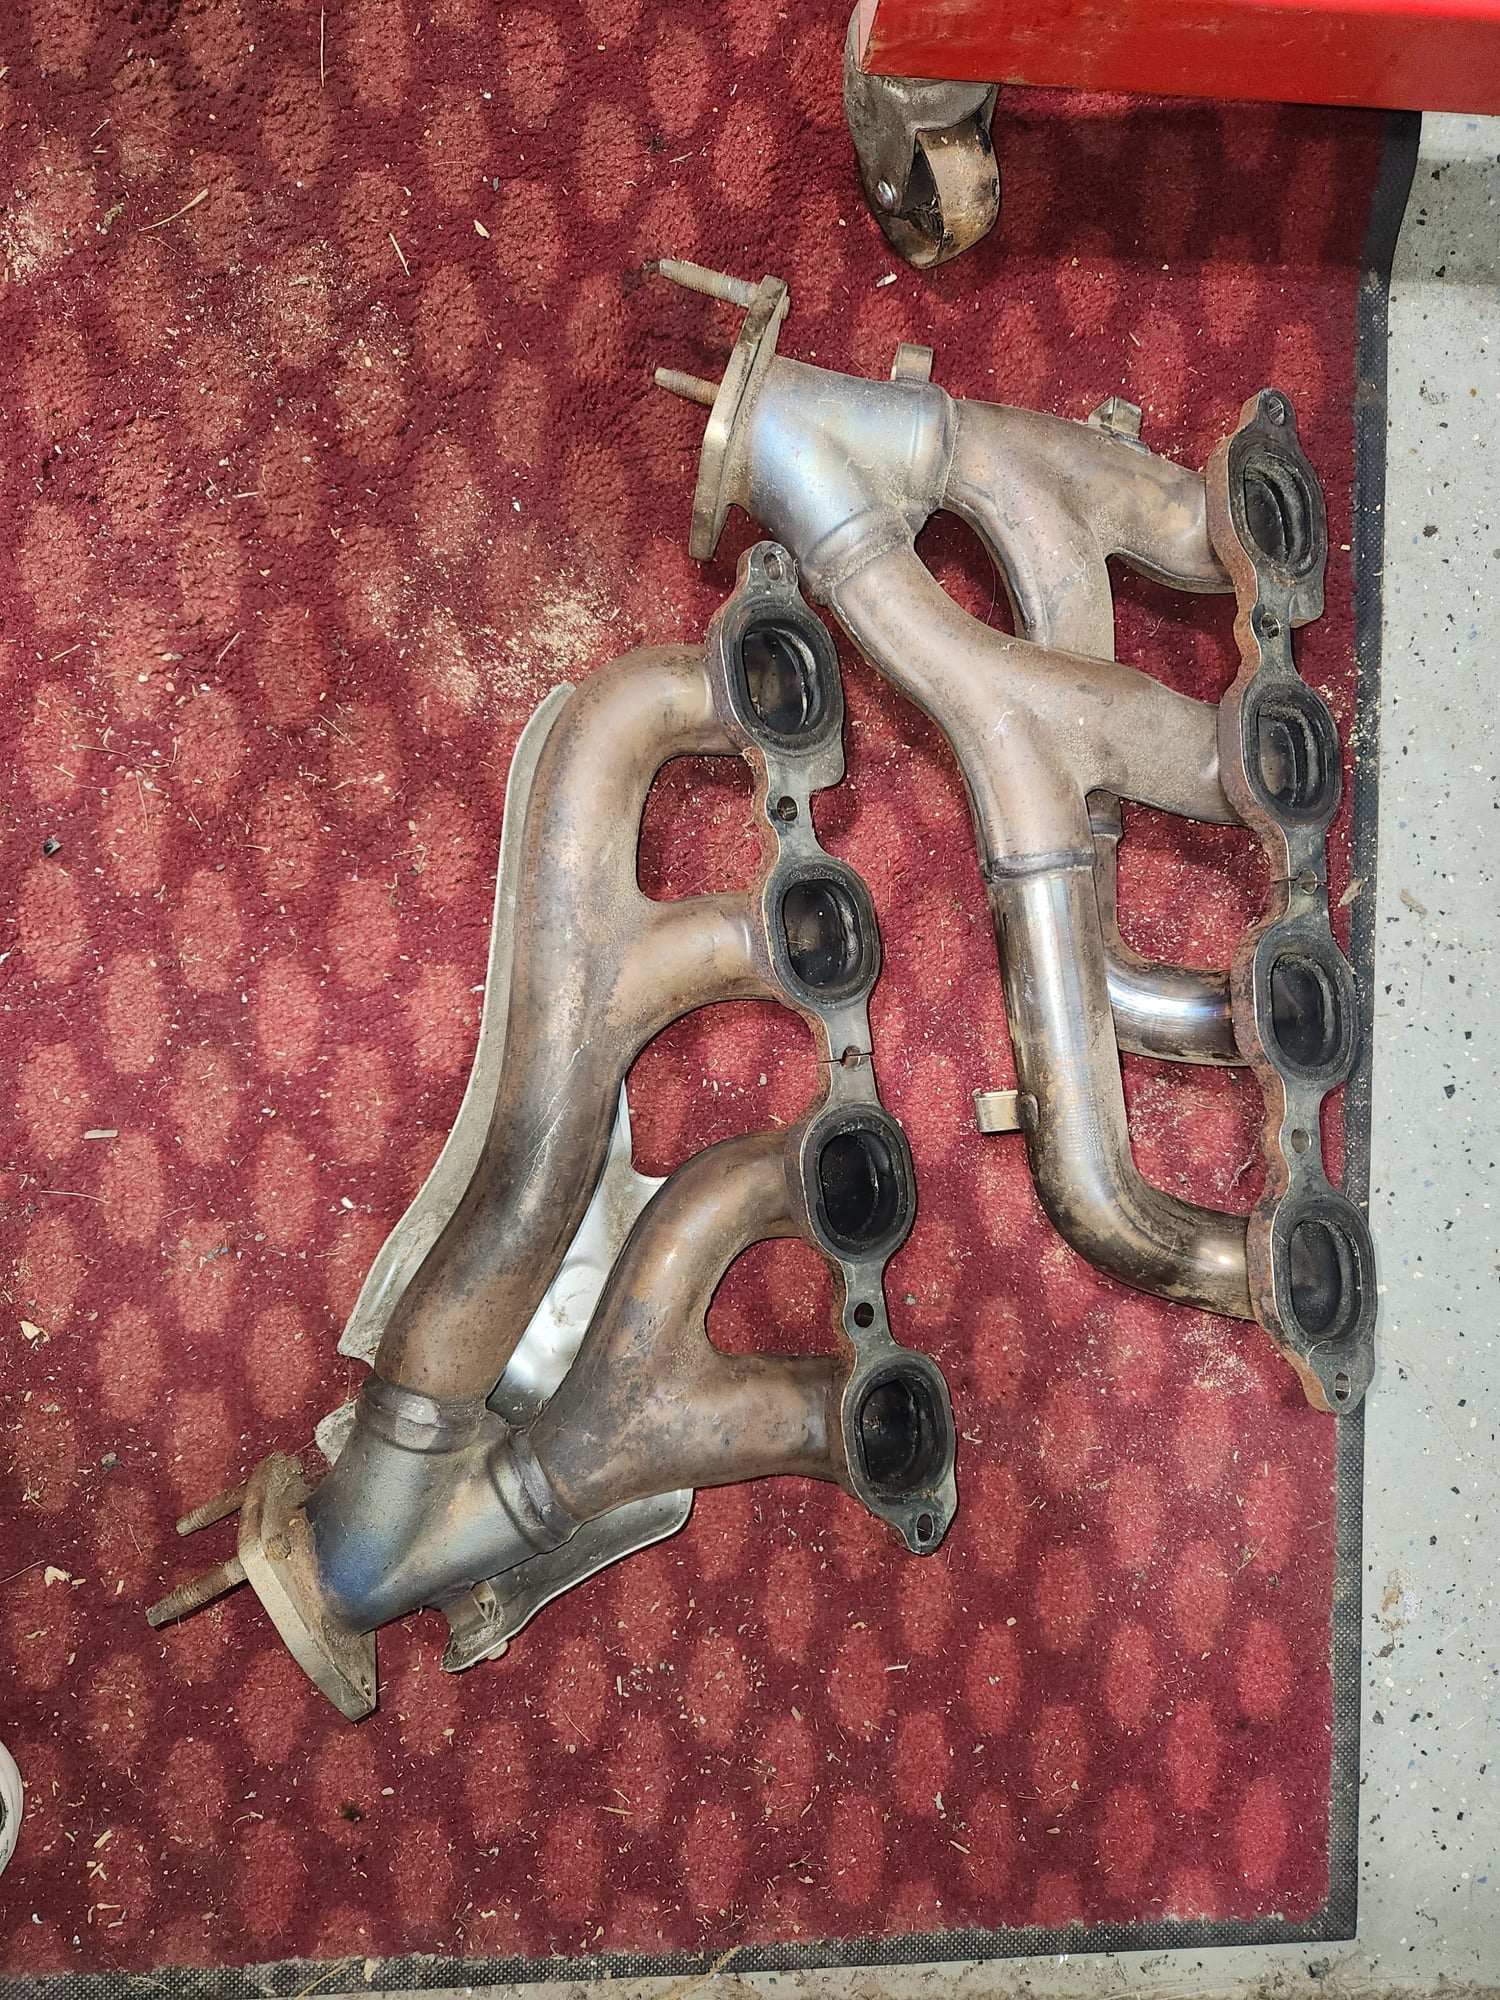 Engine - Exhaust - 2017 Camaro SS exhaust manifolds. - Used - 2016 to 2022 Chevrolet Camaro - Erie, PA 16510, United States